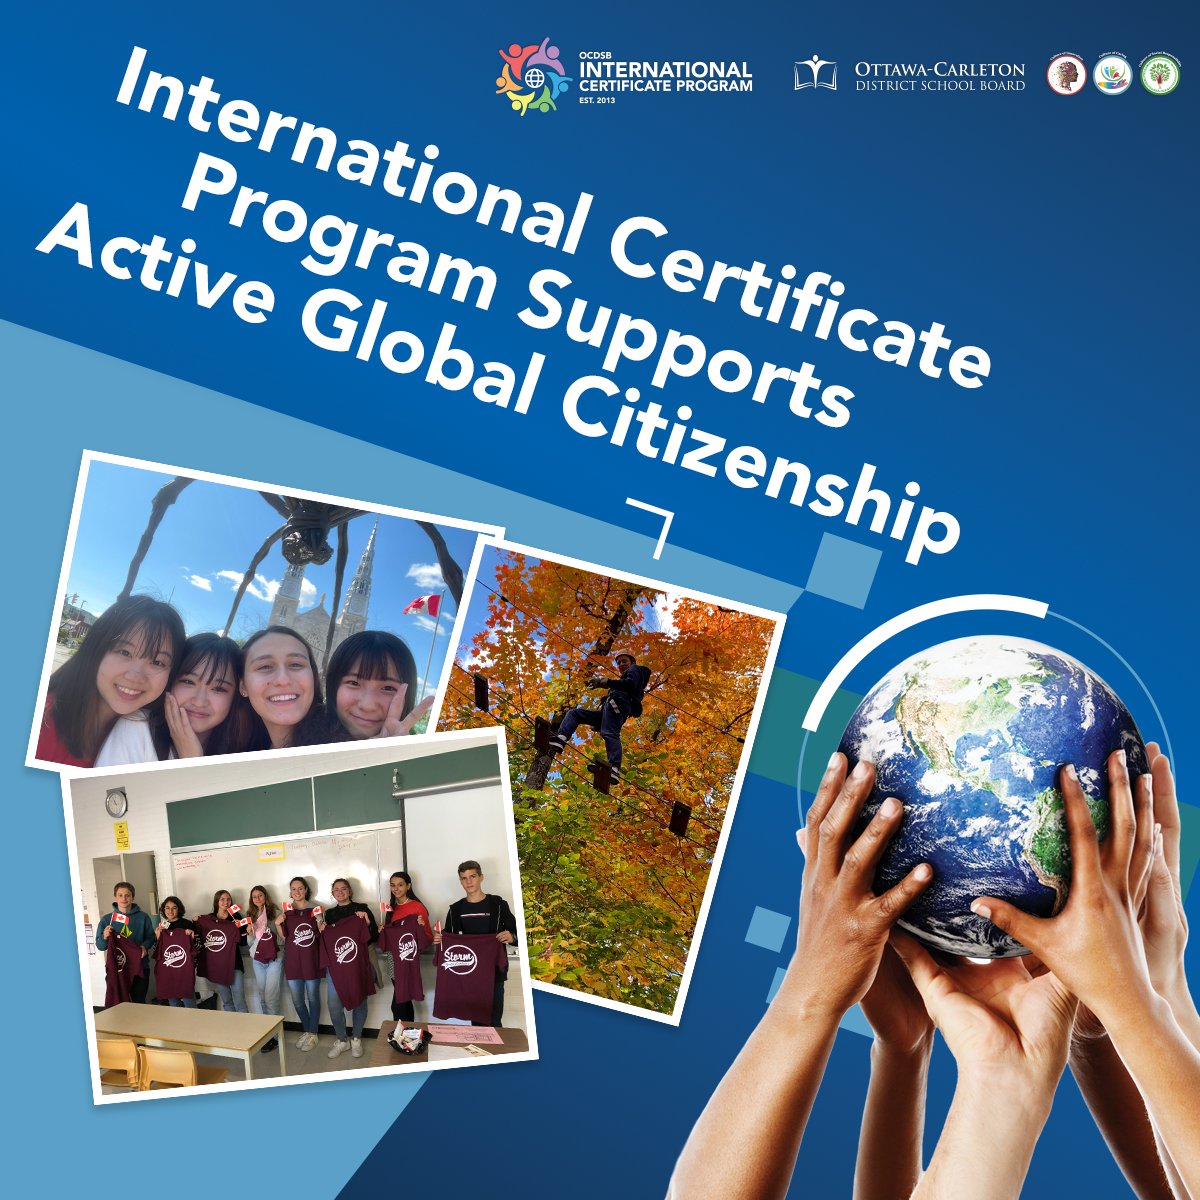 In the OCDSB's International Certificate Program (ICP), students are learning about the world and growing as intercultural ambassadors! Read more about the ICP and what students have had to say about the experience: ow.ly/CZv350Li5si